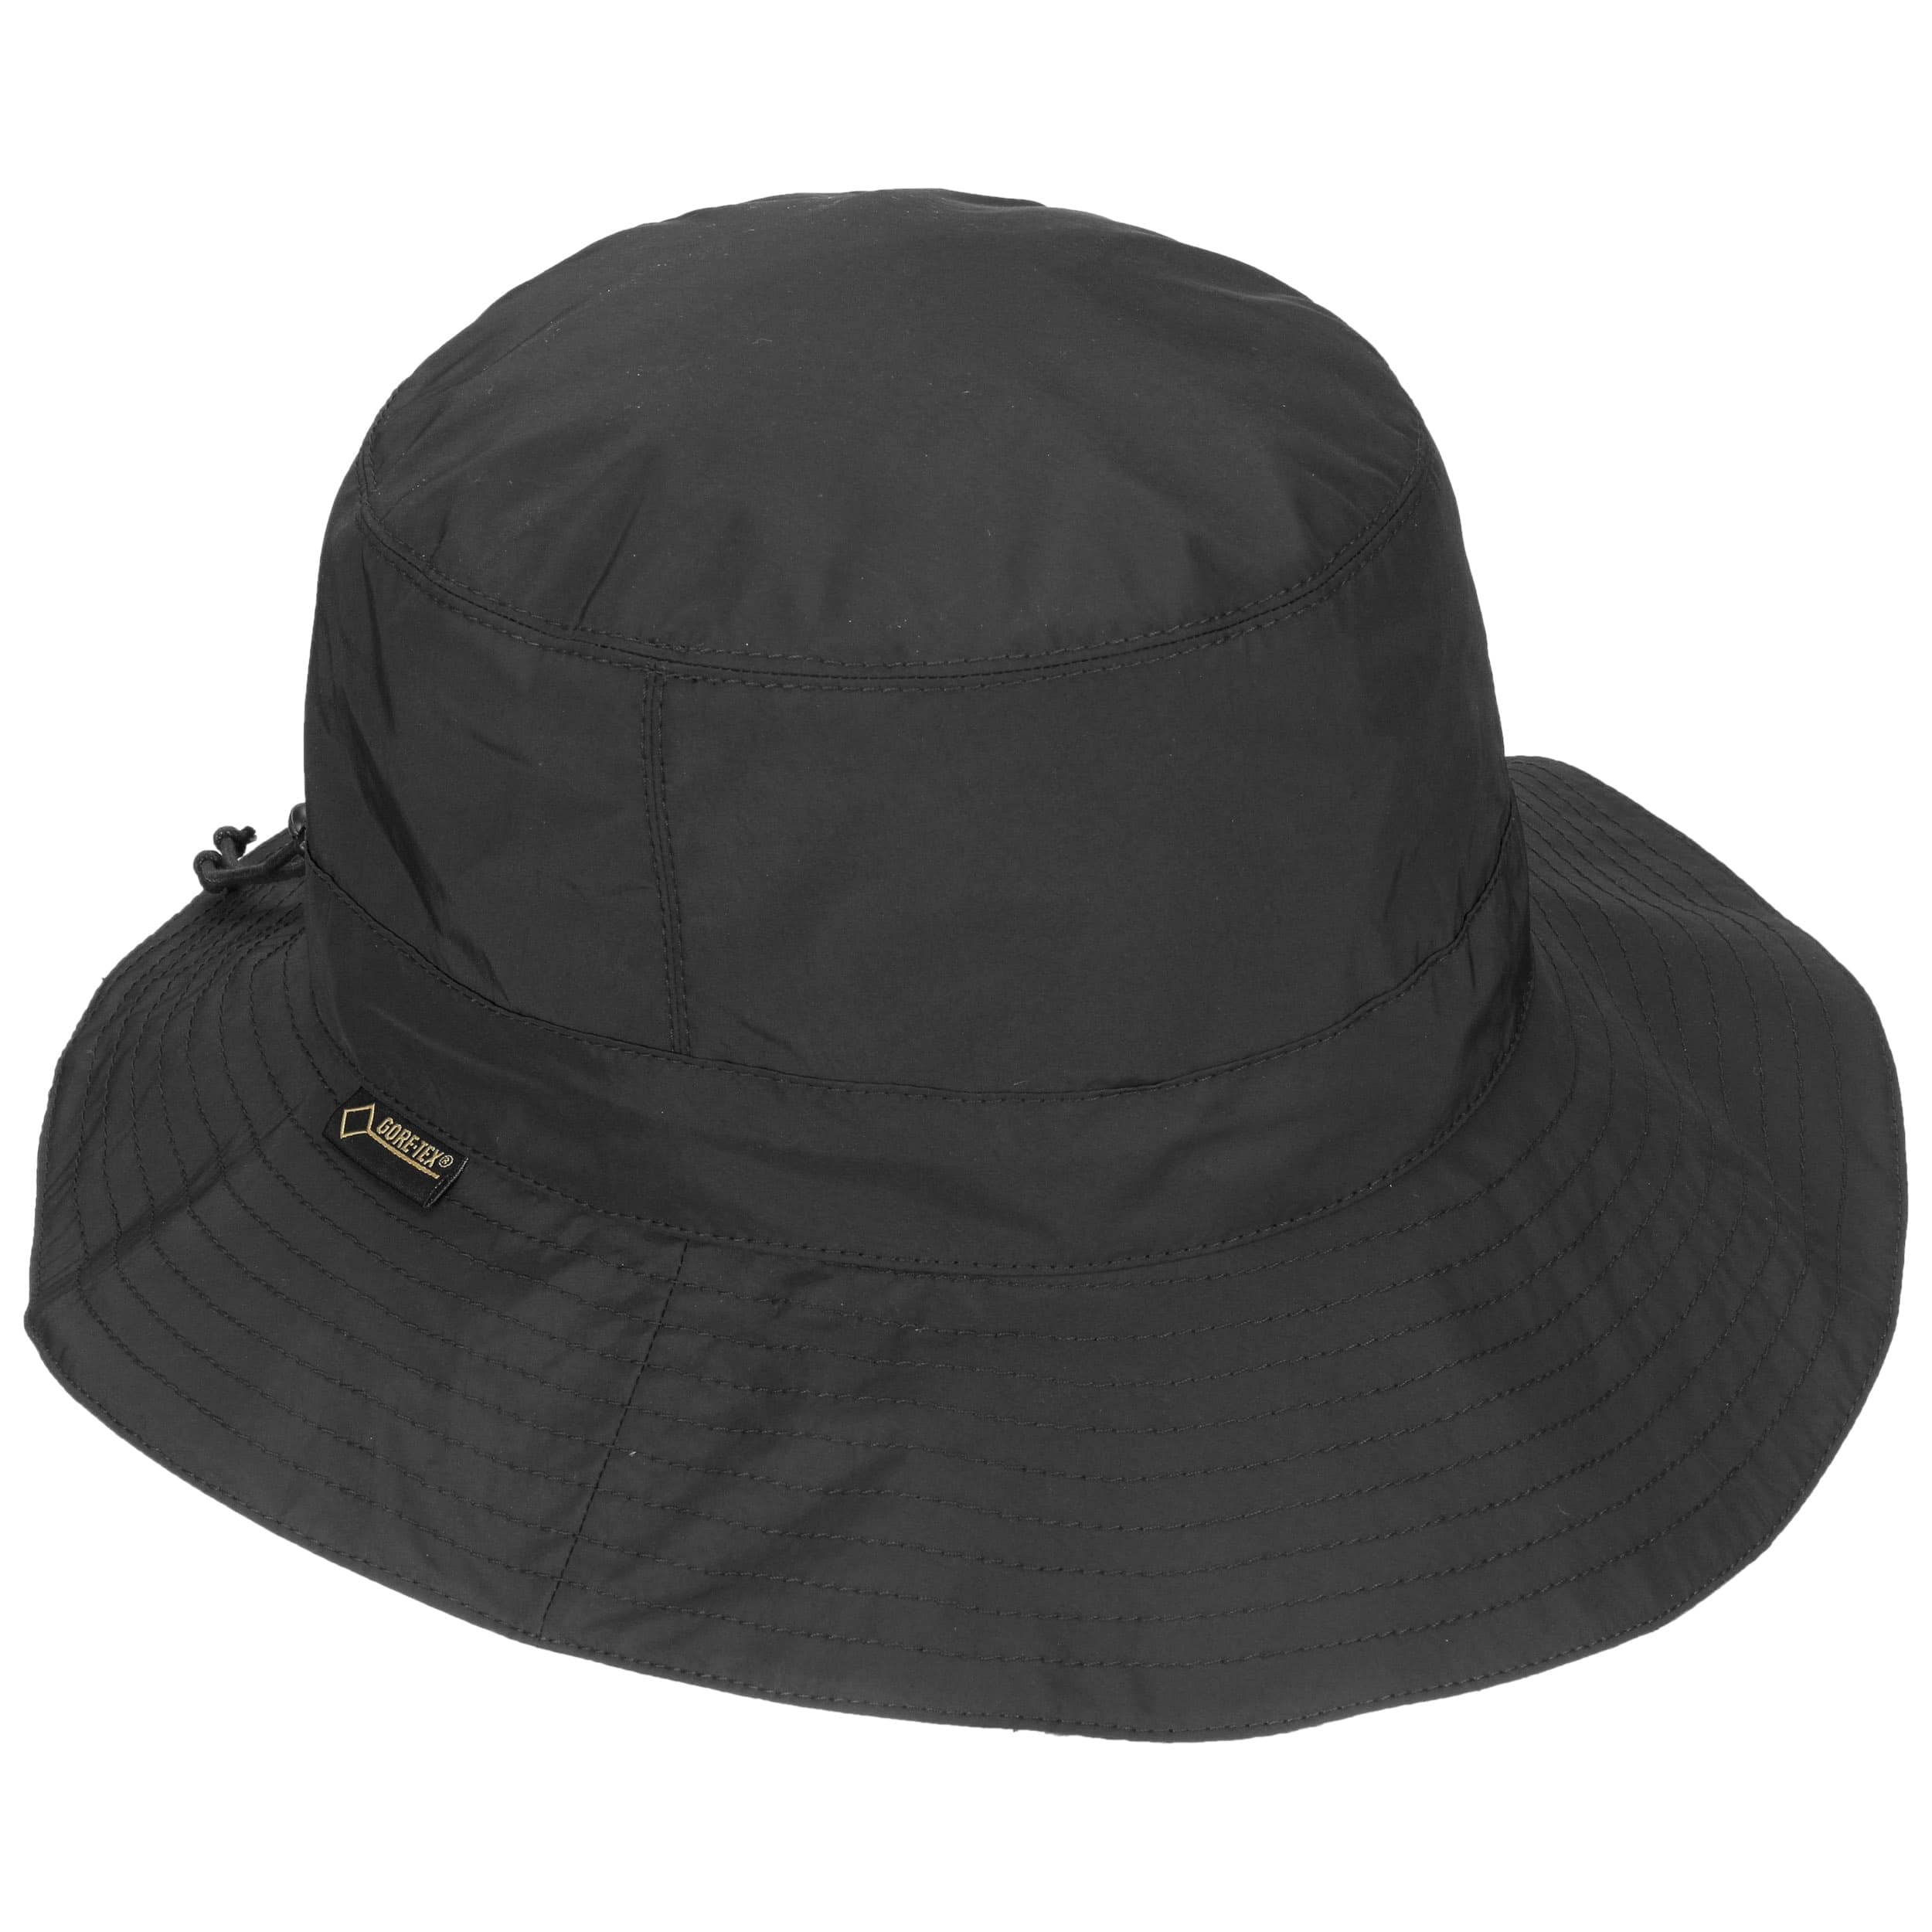 Gore-Tex Protect Rain Hat by Seeberger, GBP 82,95 --> Hats, caps ...